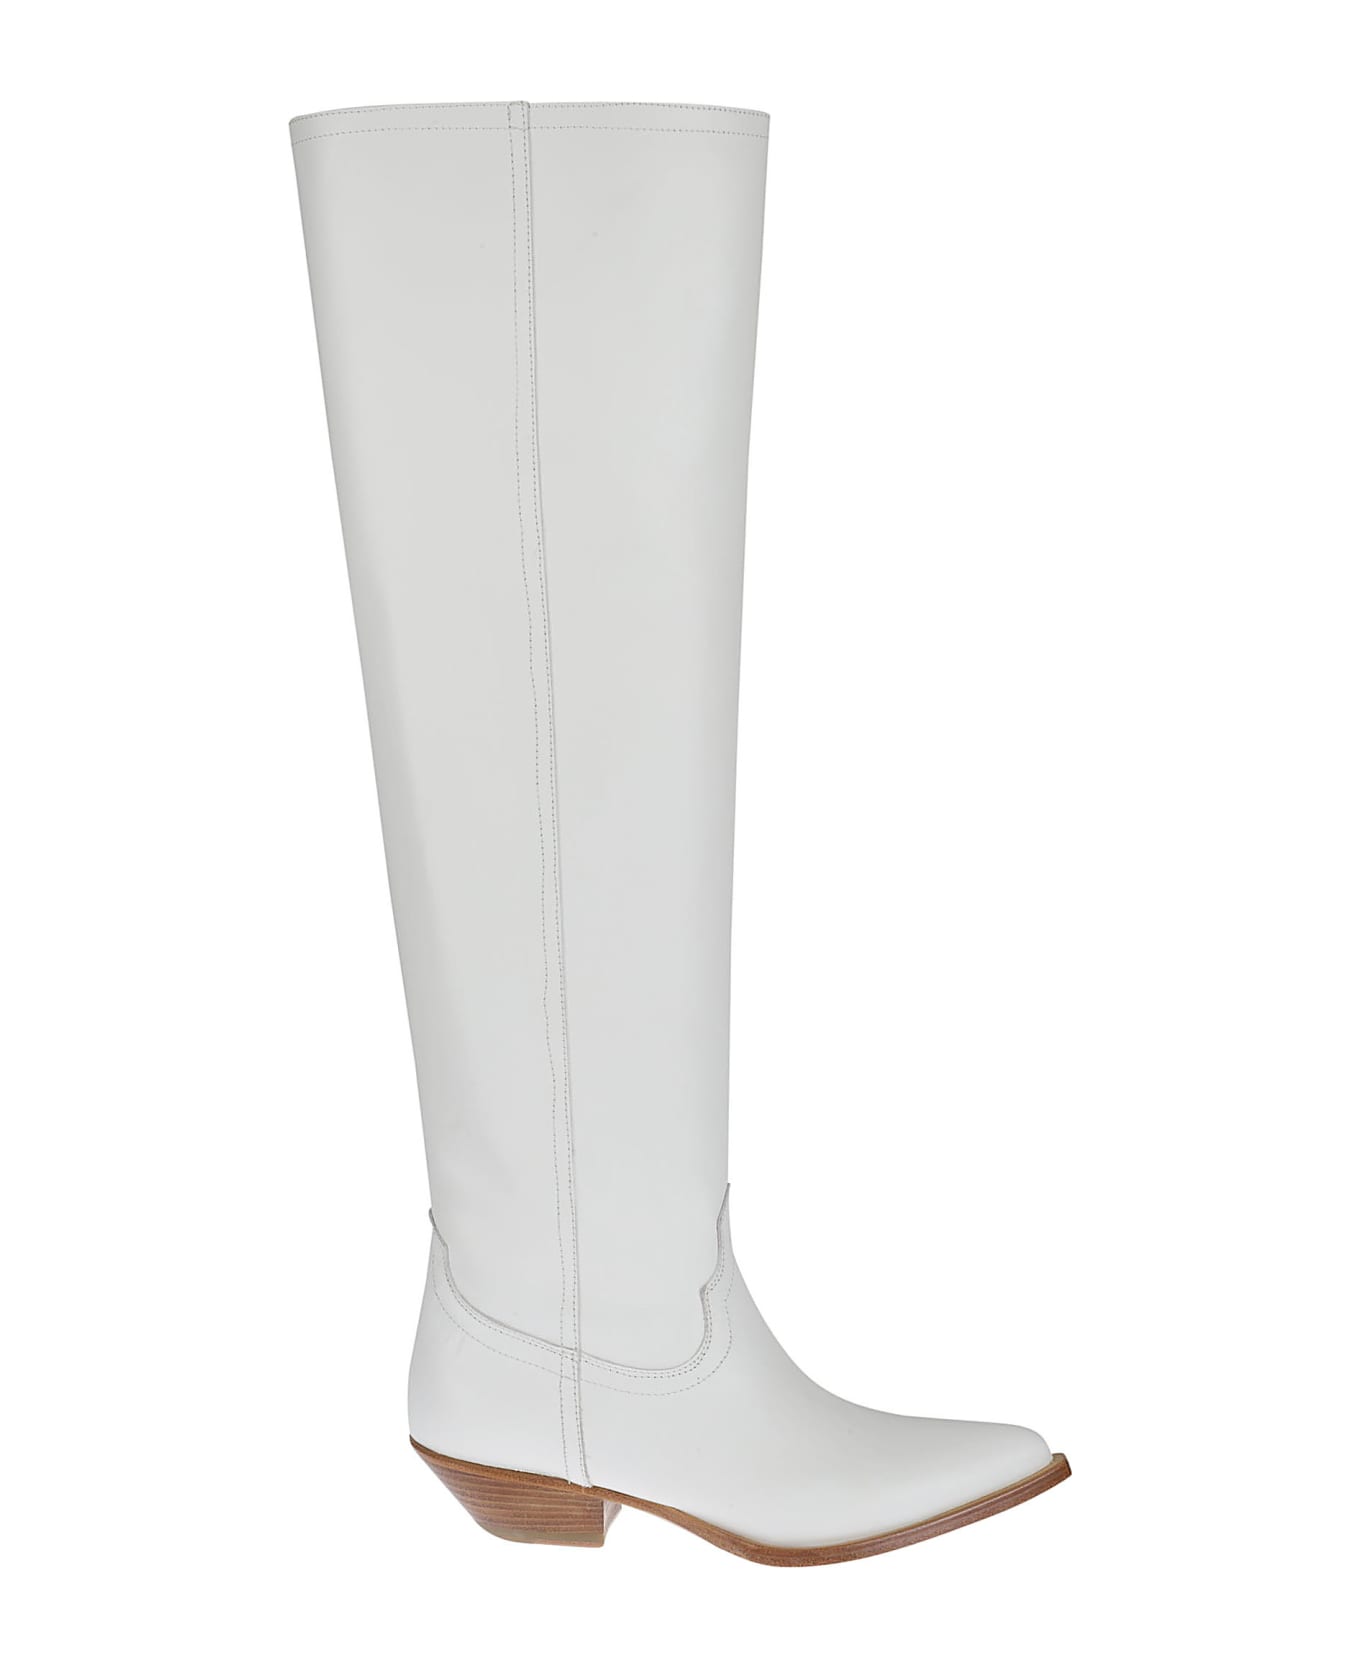 Sonora Acapulco Over-the-knee Boots | italist